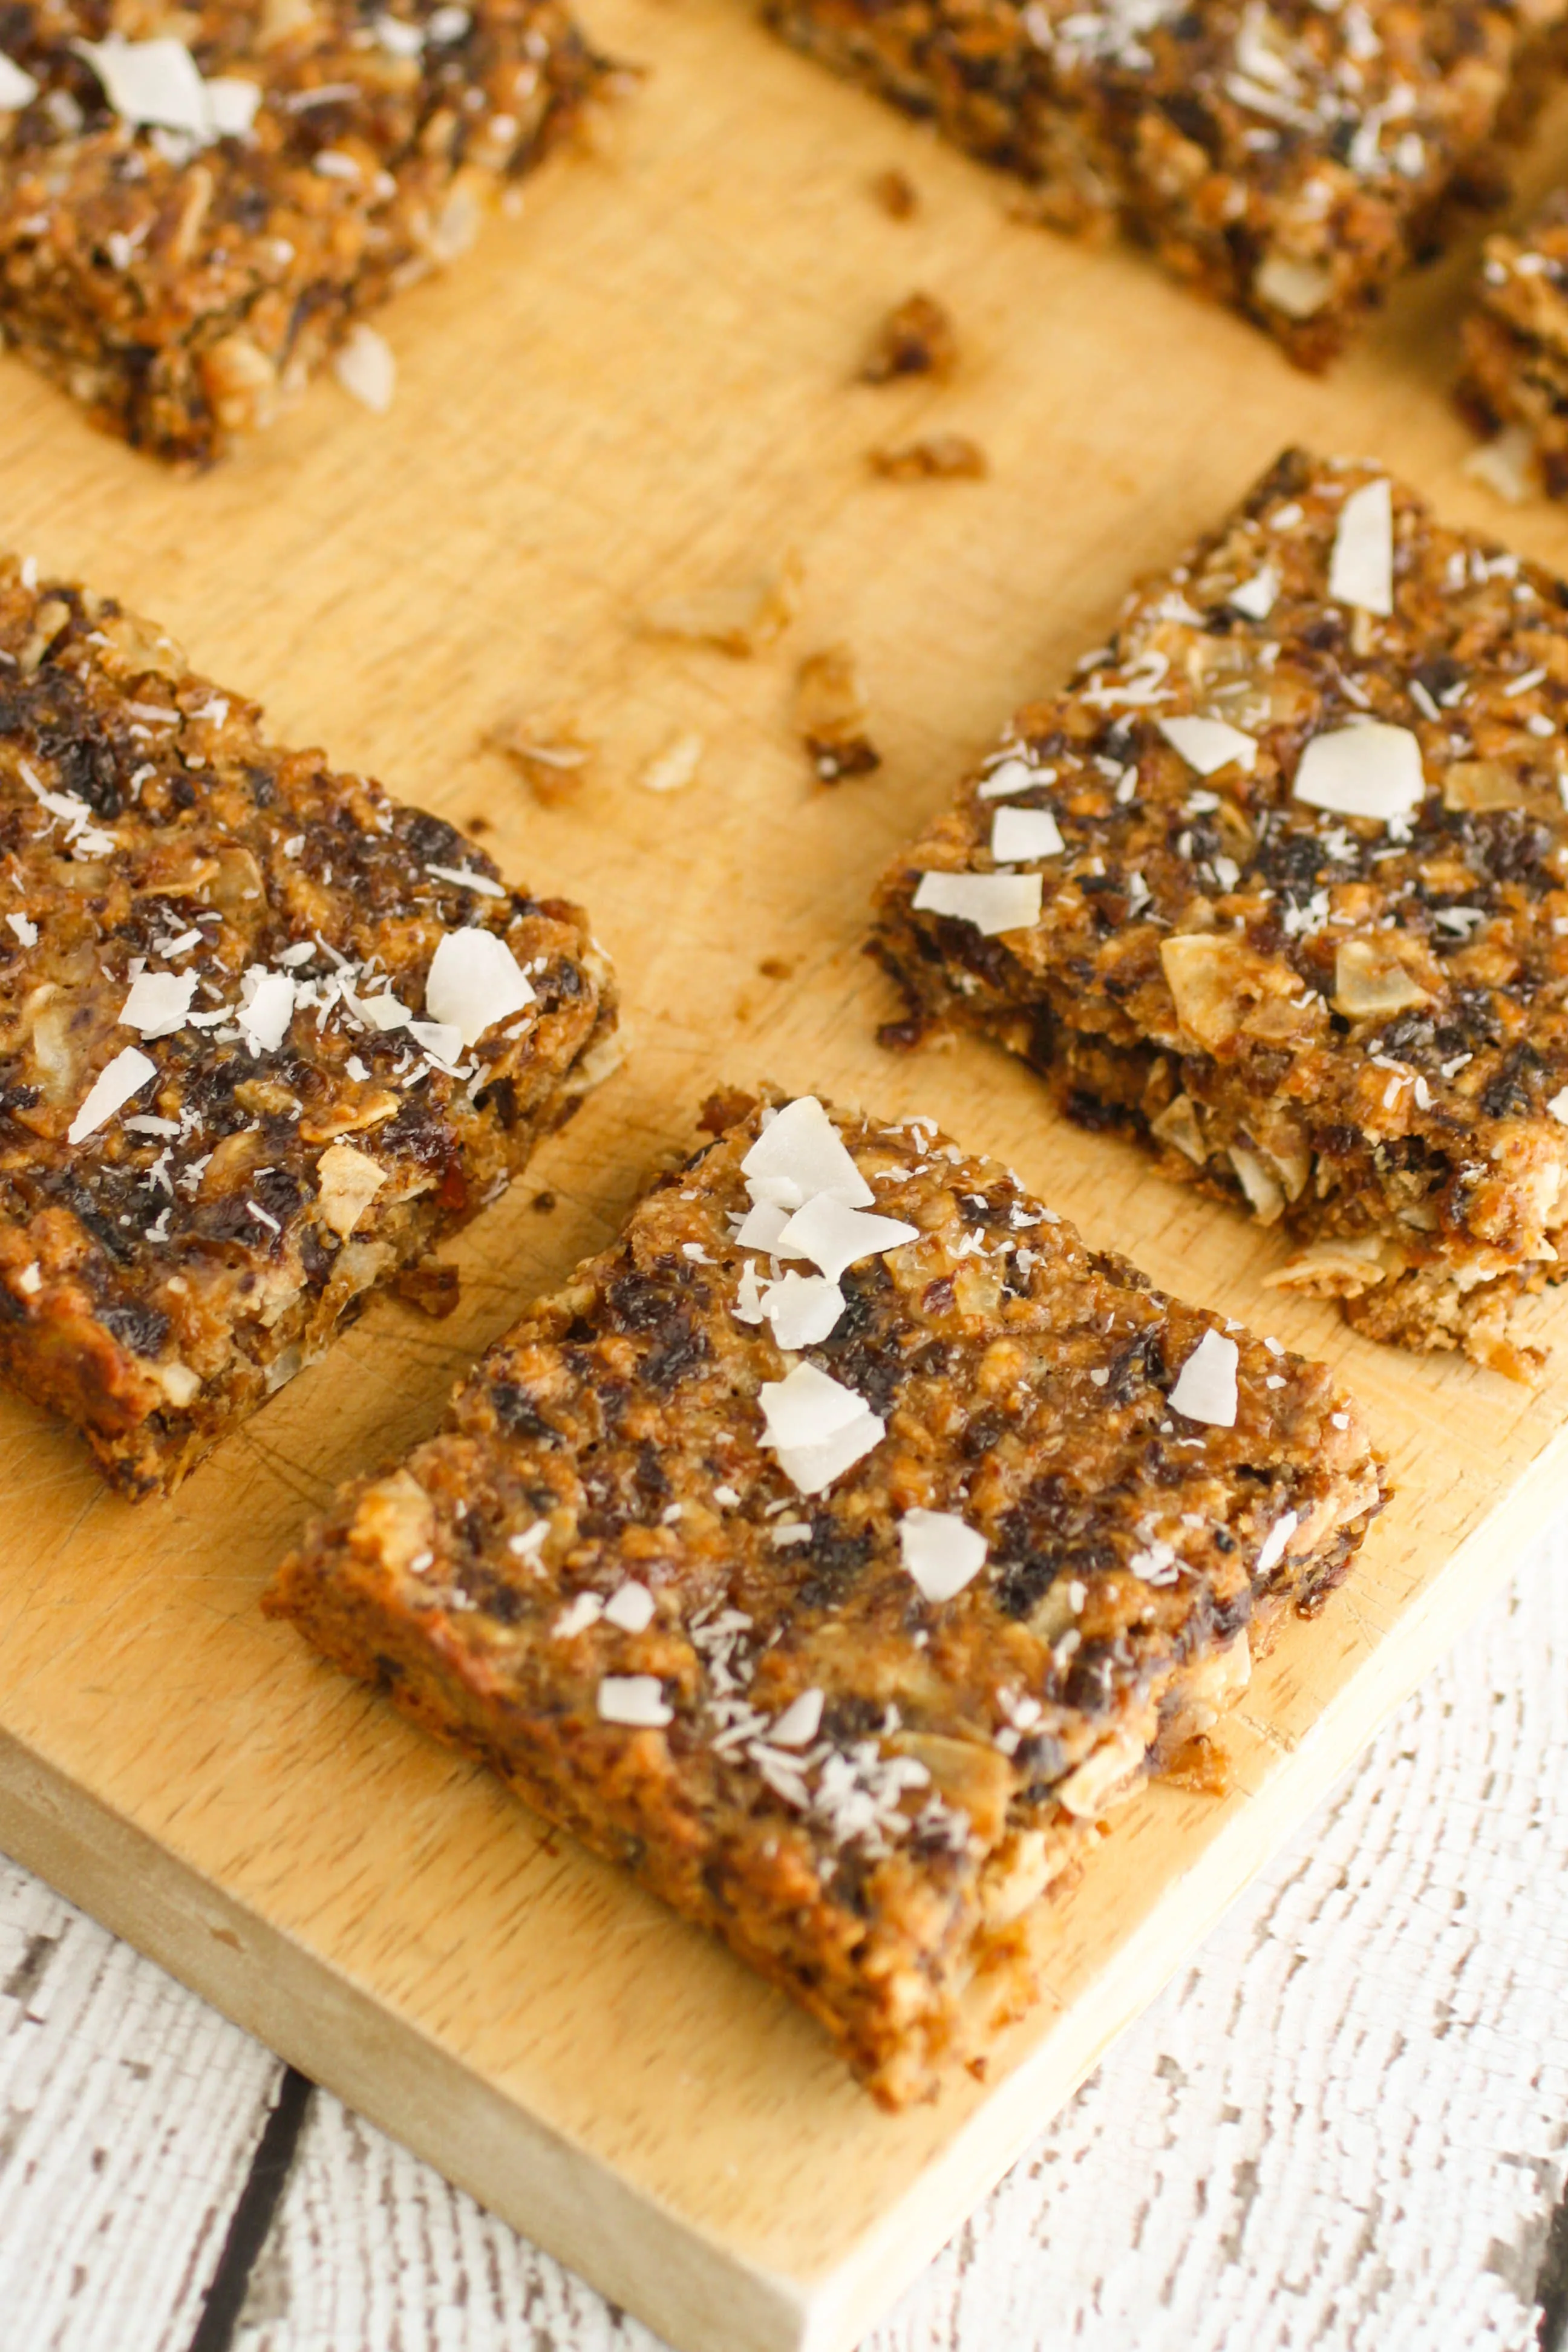 Chewy Coconut and Dried Fruit Bars are a great treat with a healthy vibe. You'll love these chewy coconut bars with dried fruit for their flavor and healthy vibe.